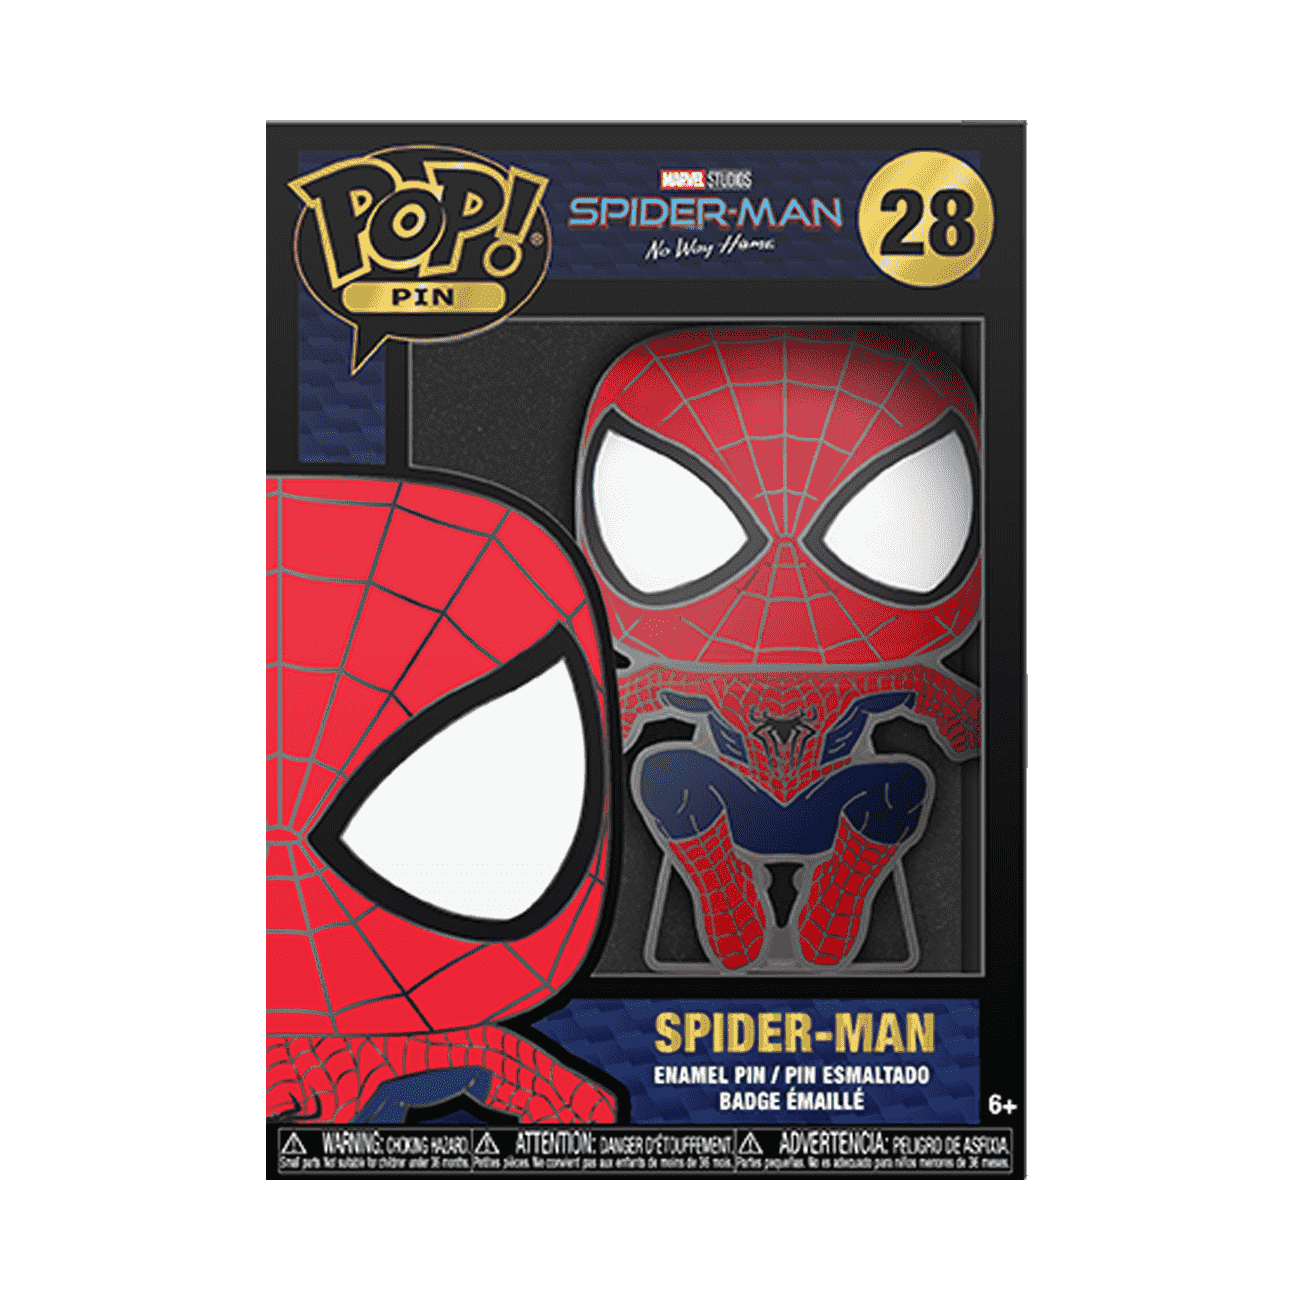 Buy Pop! Pin The Amazing Spider-Man (Glow) at Funko.